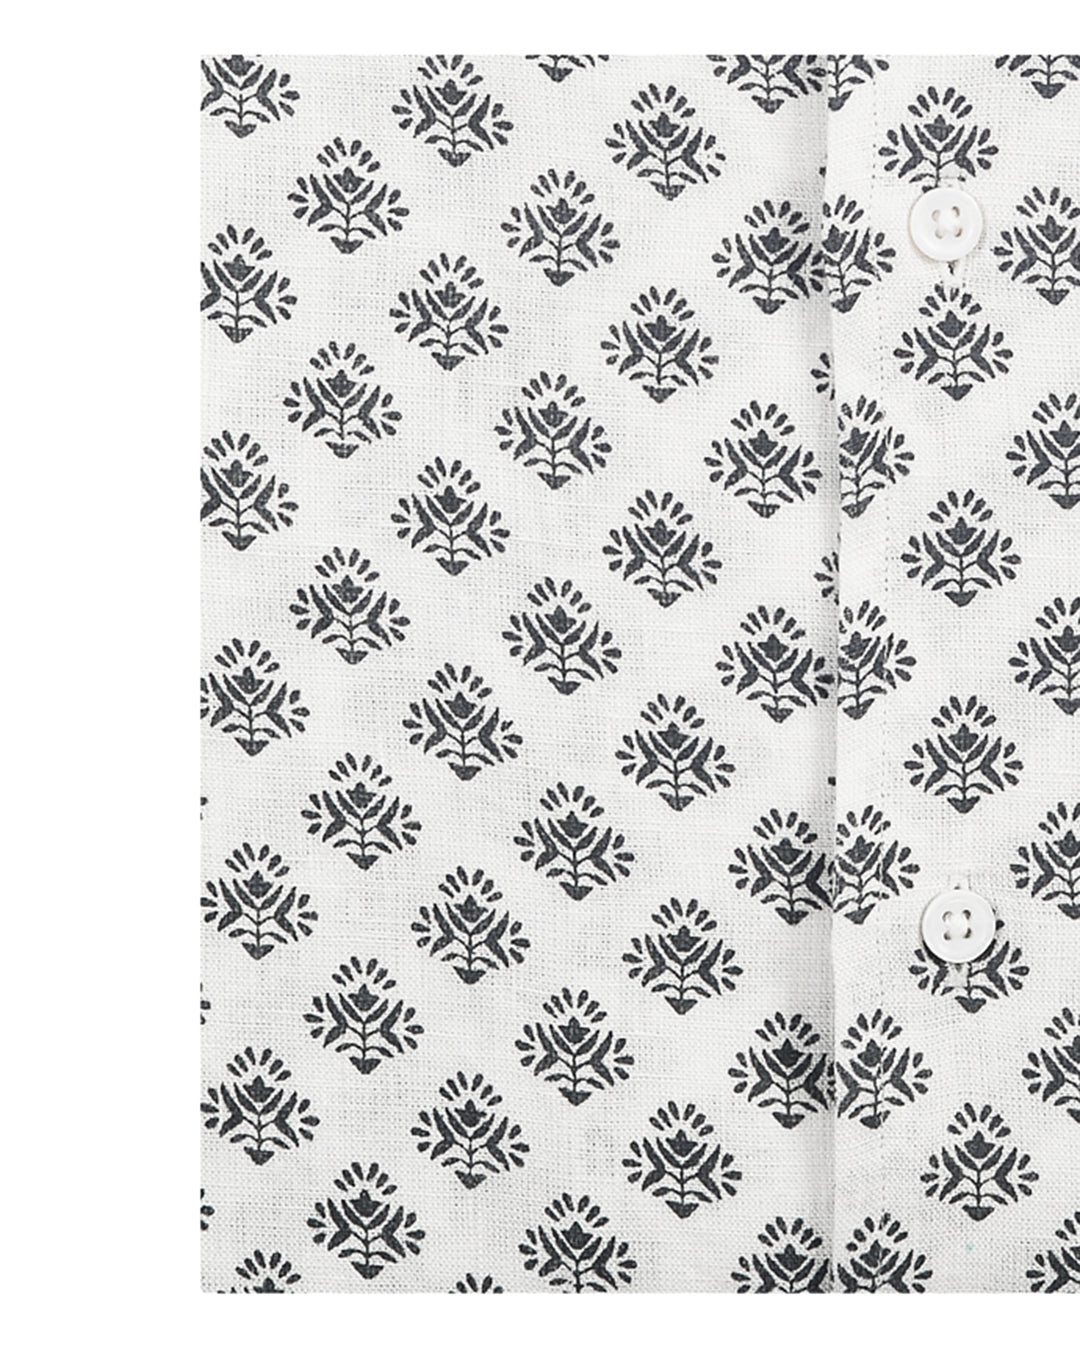 Camp collar PRESET STYLE in Linen:Black Flowers Printed on White Linen